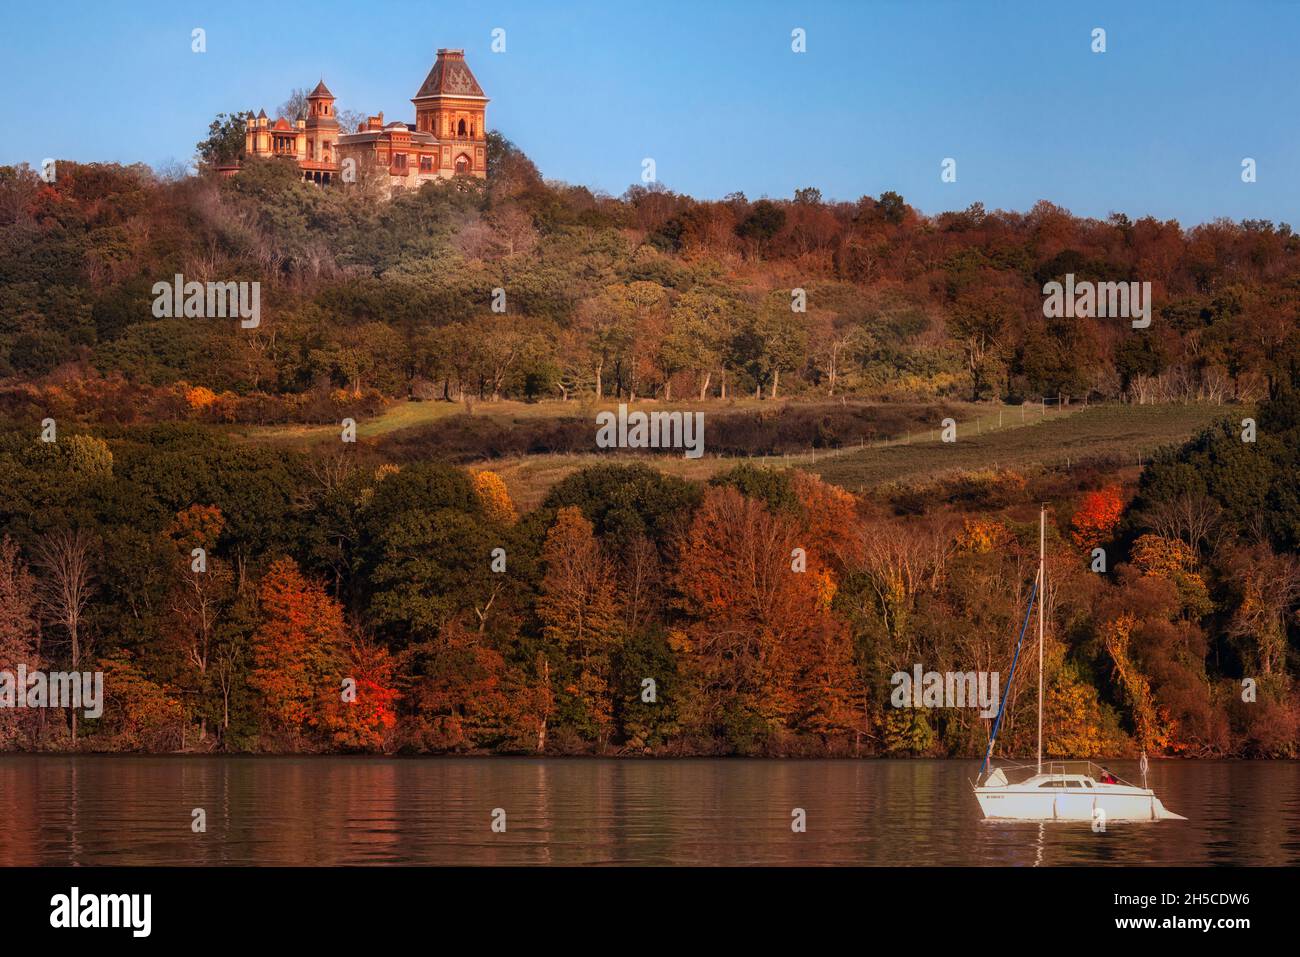 Sailing By Olana Mansion - View of the Olana State Historic Site with a boat sailing along the Hudson River in the Catstkill region of the state of Ne Stock Photo